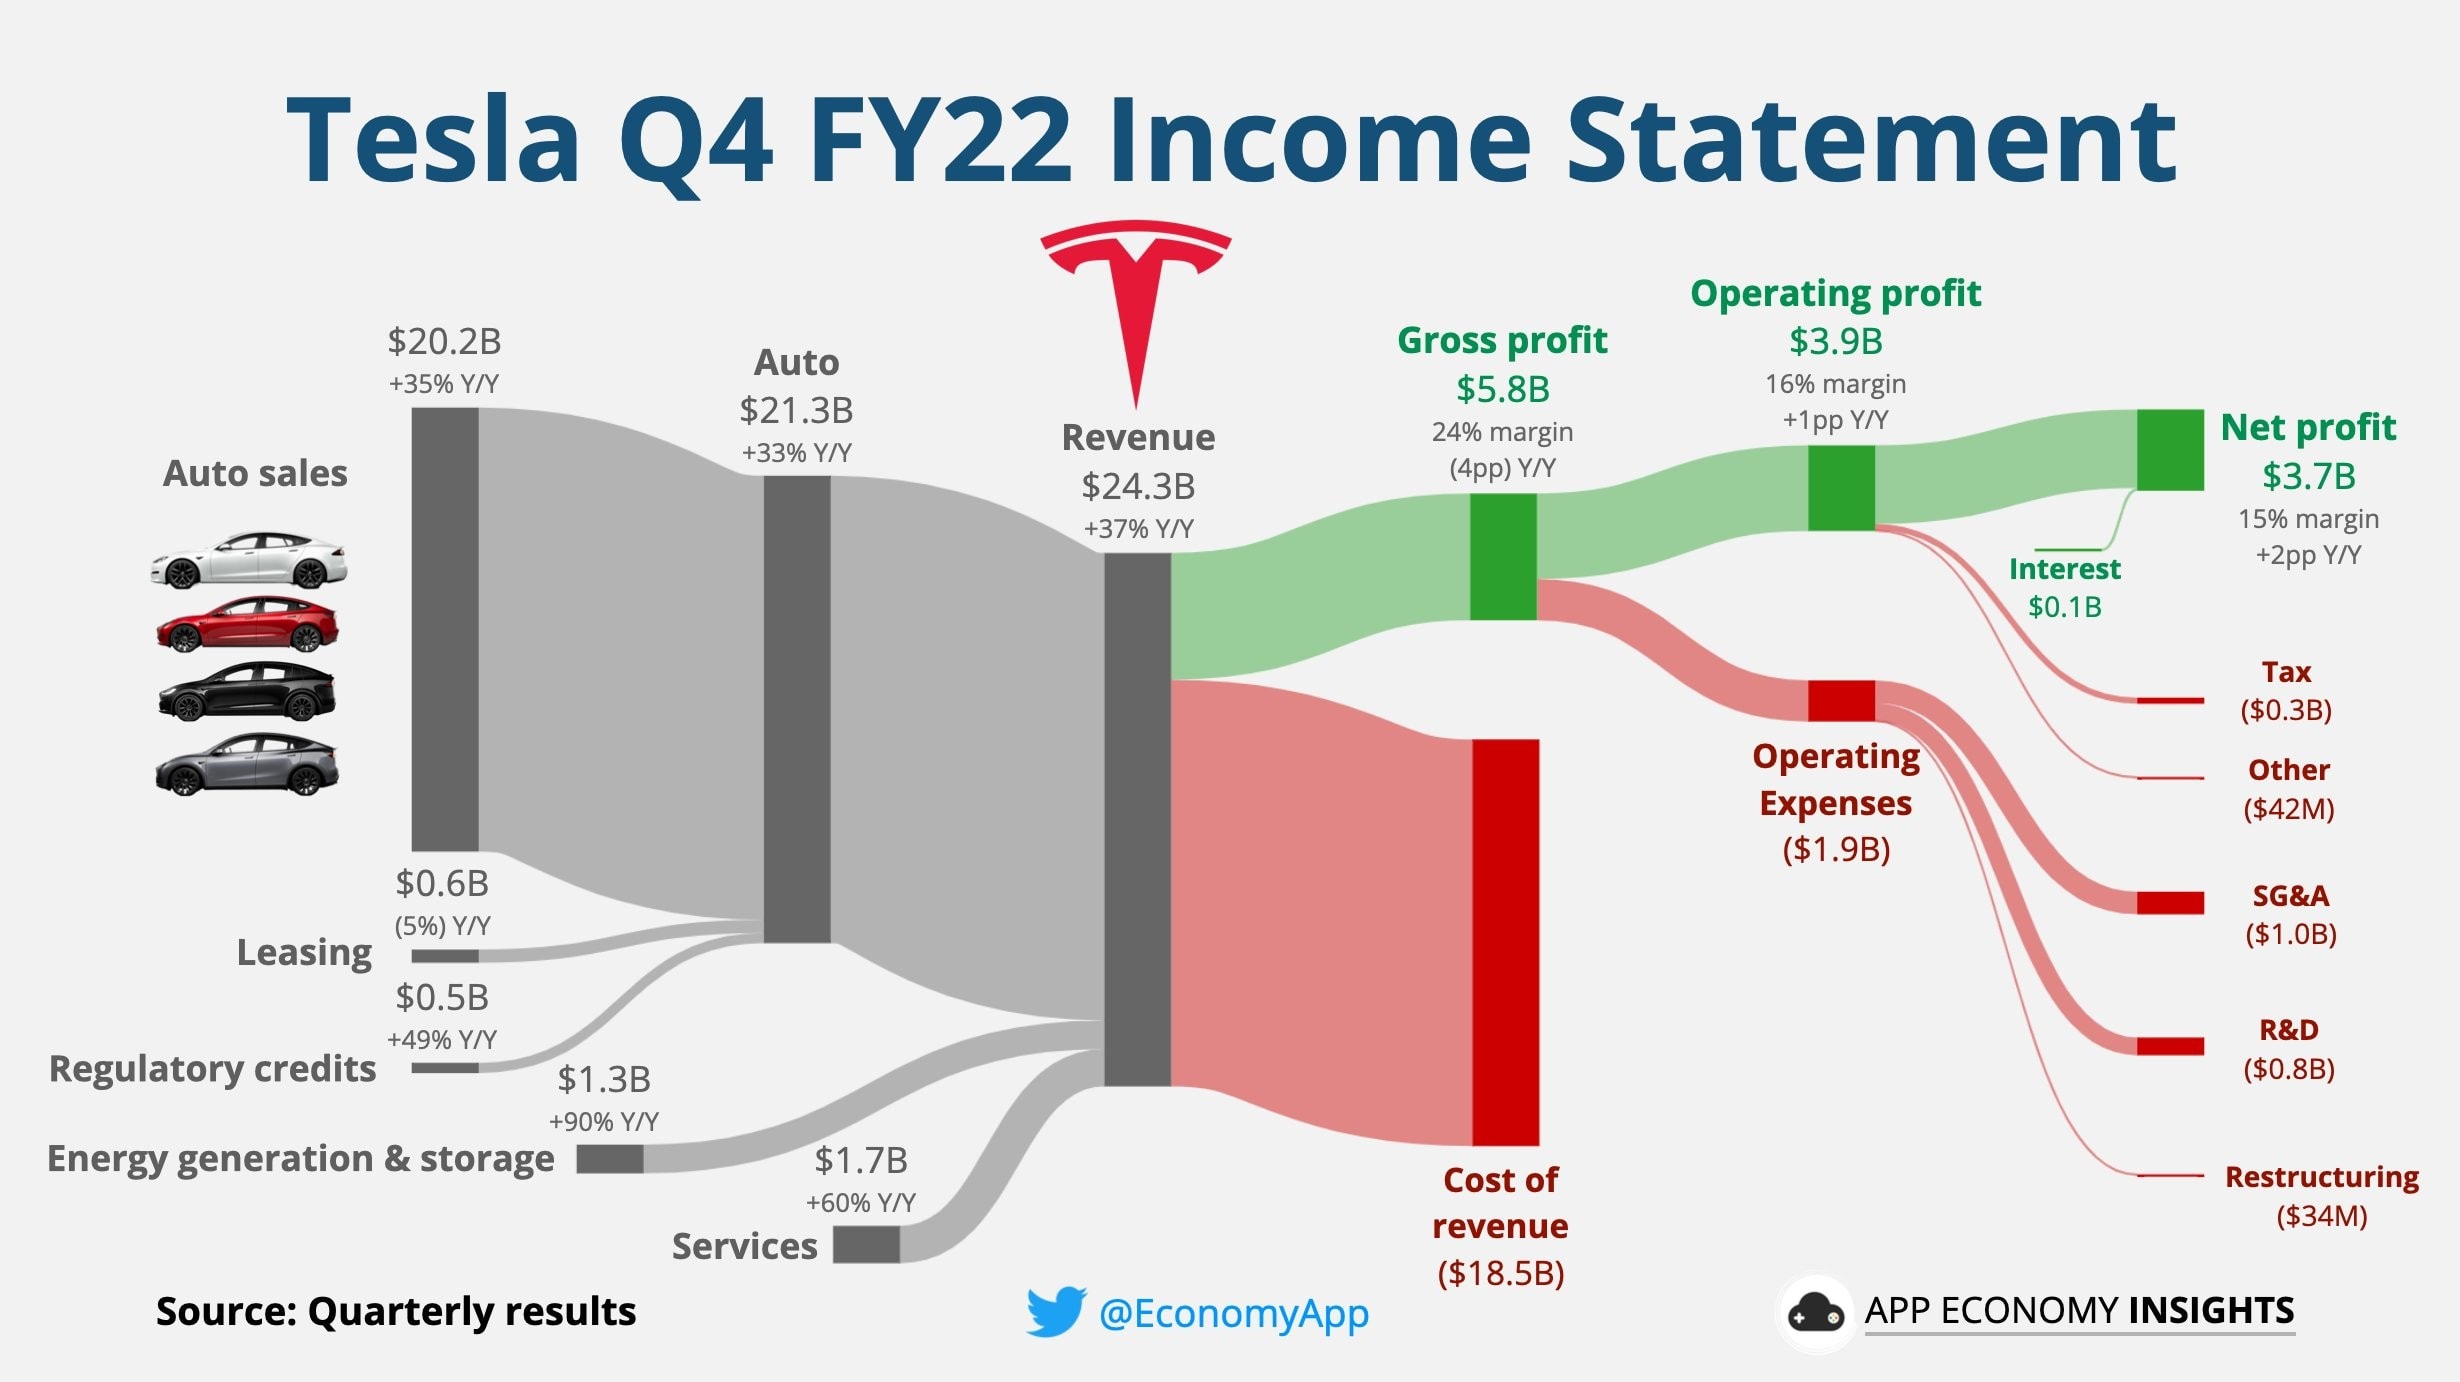 Tesla's 2022 Financial Data Impresses on Every Metric, but Slower